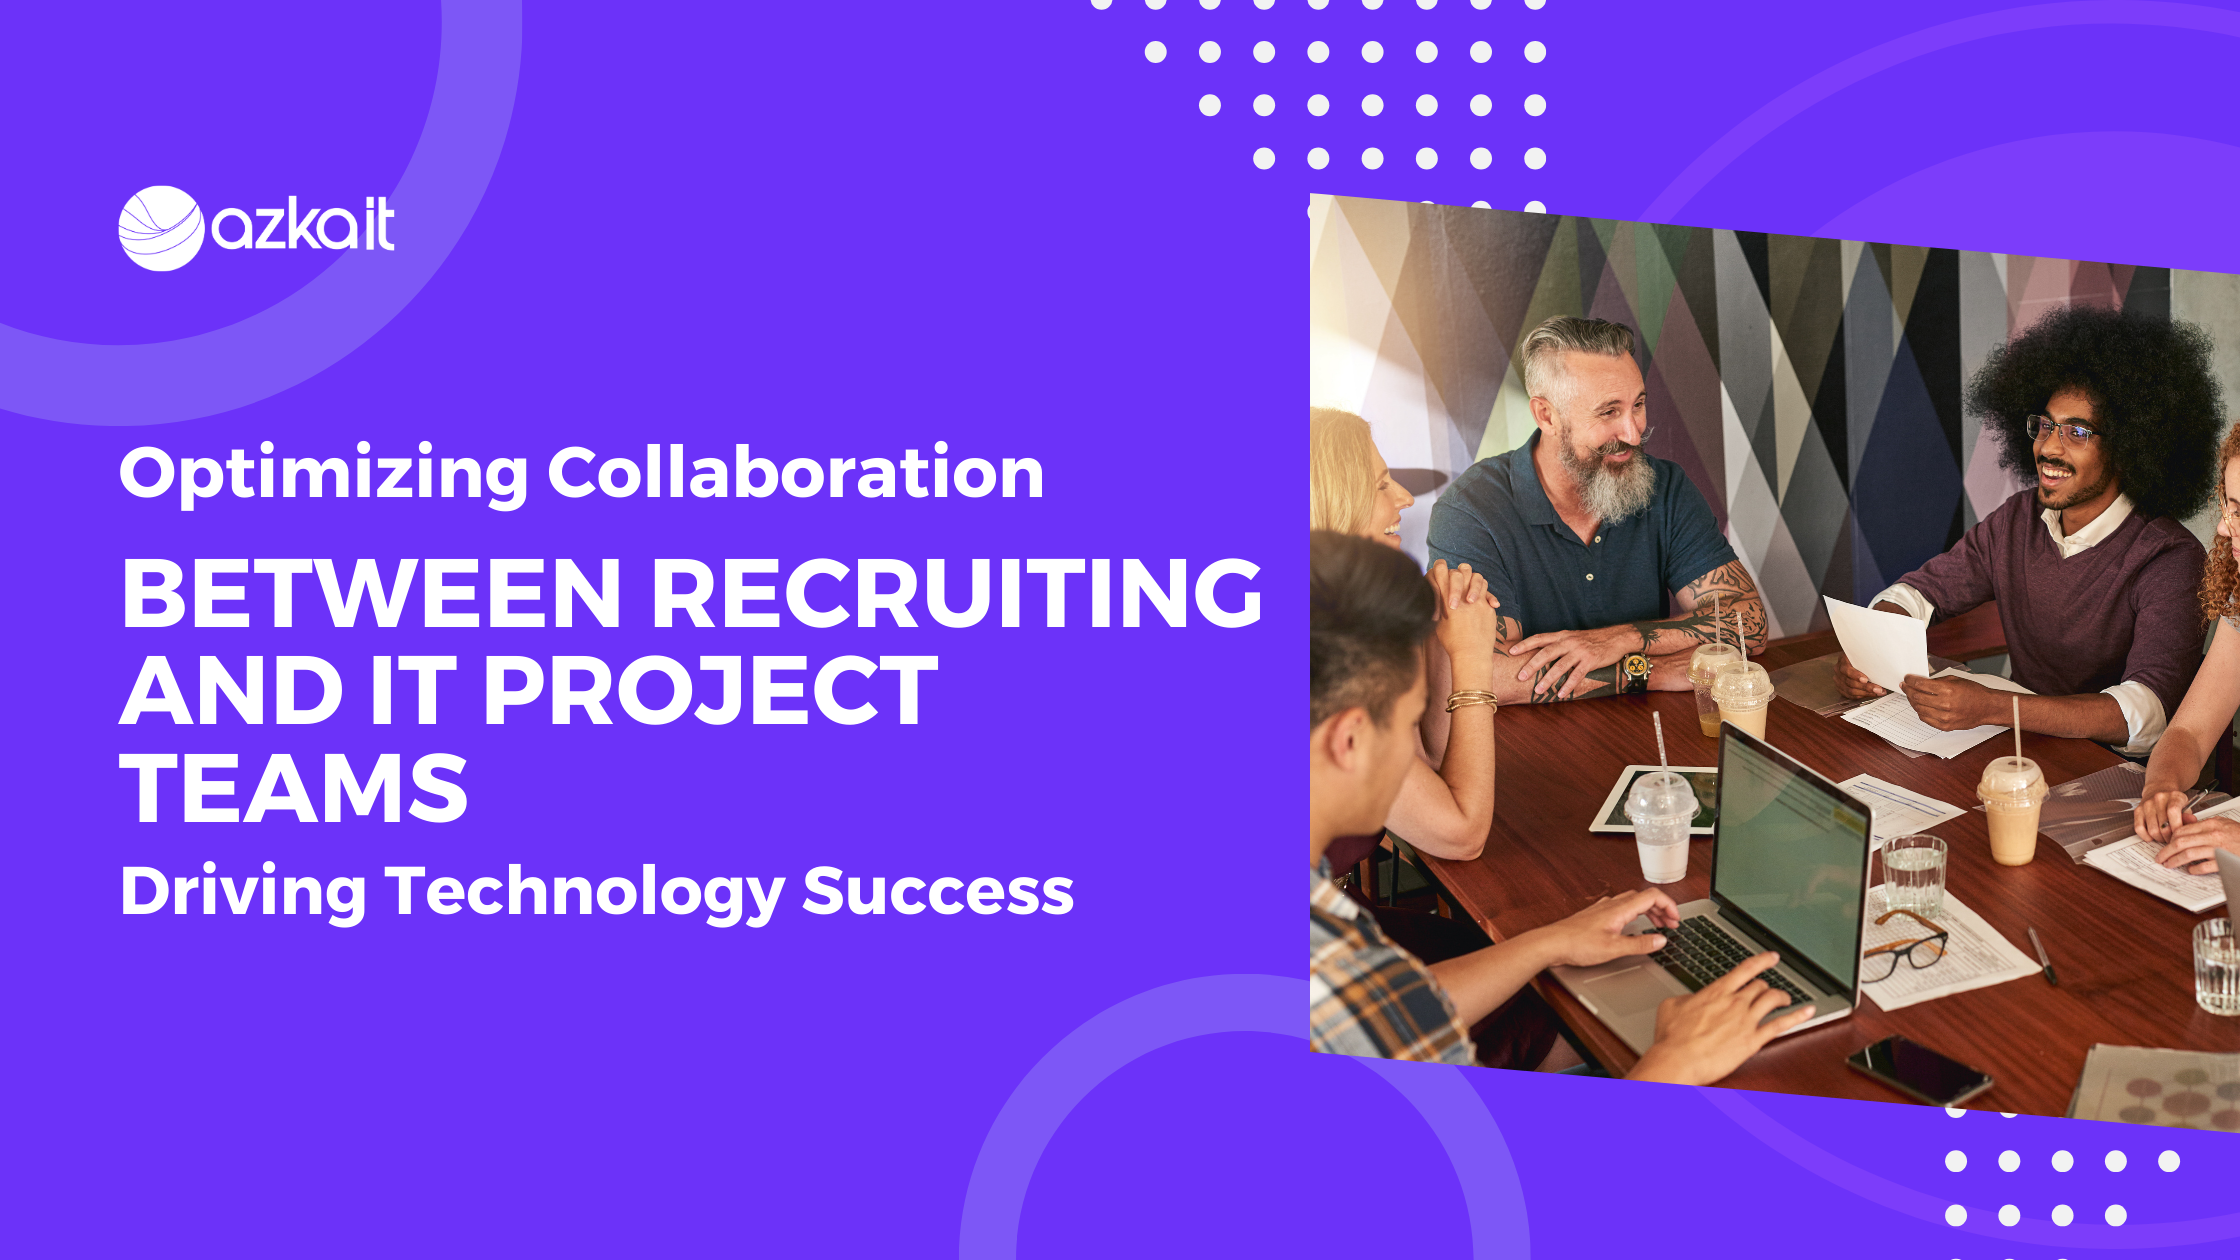 Optimizing Collaboration between Recruiting and IT Project Teams